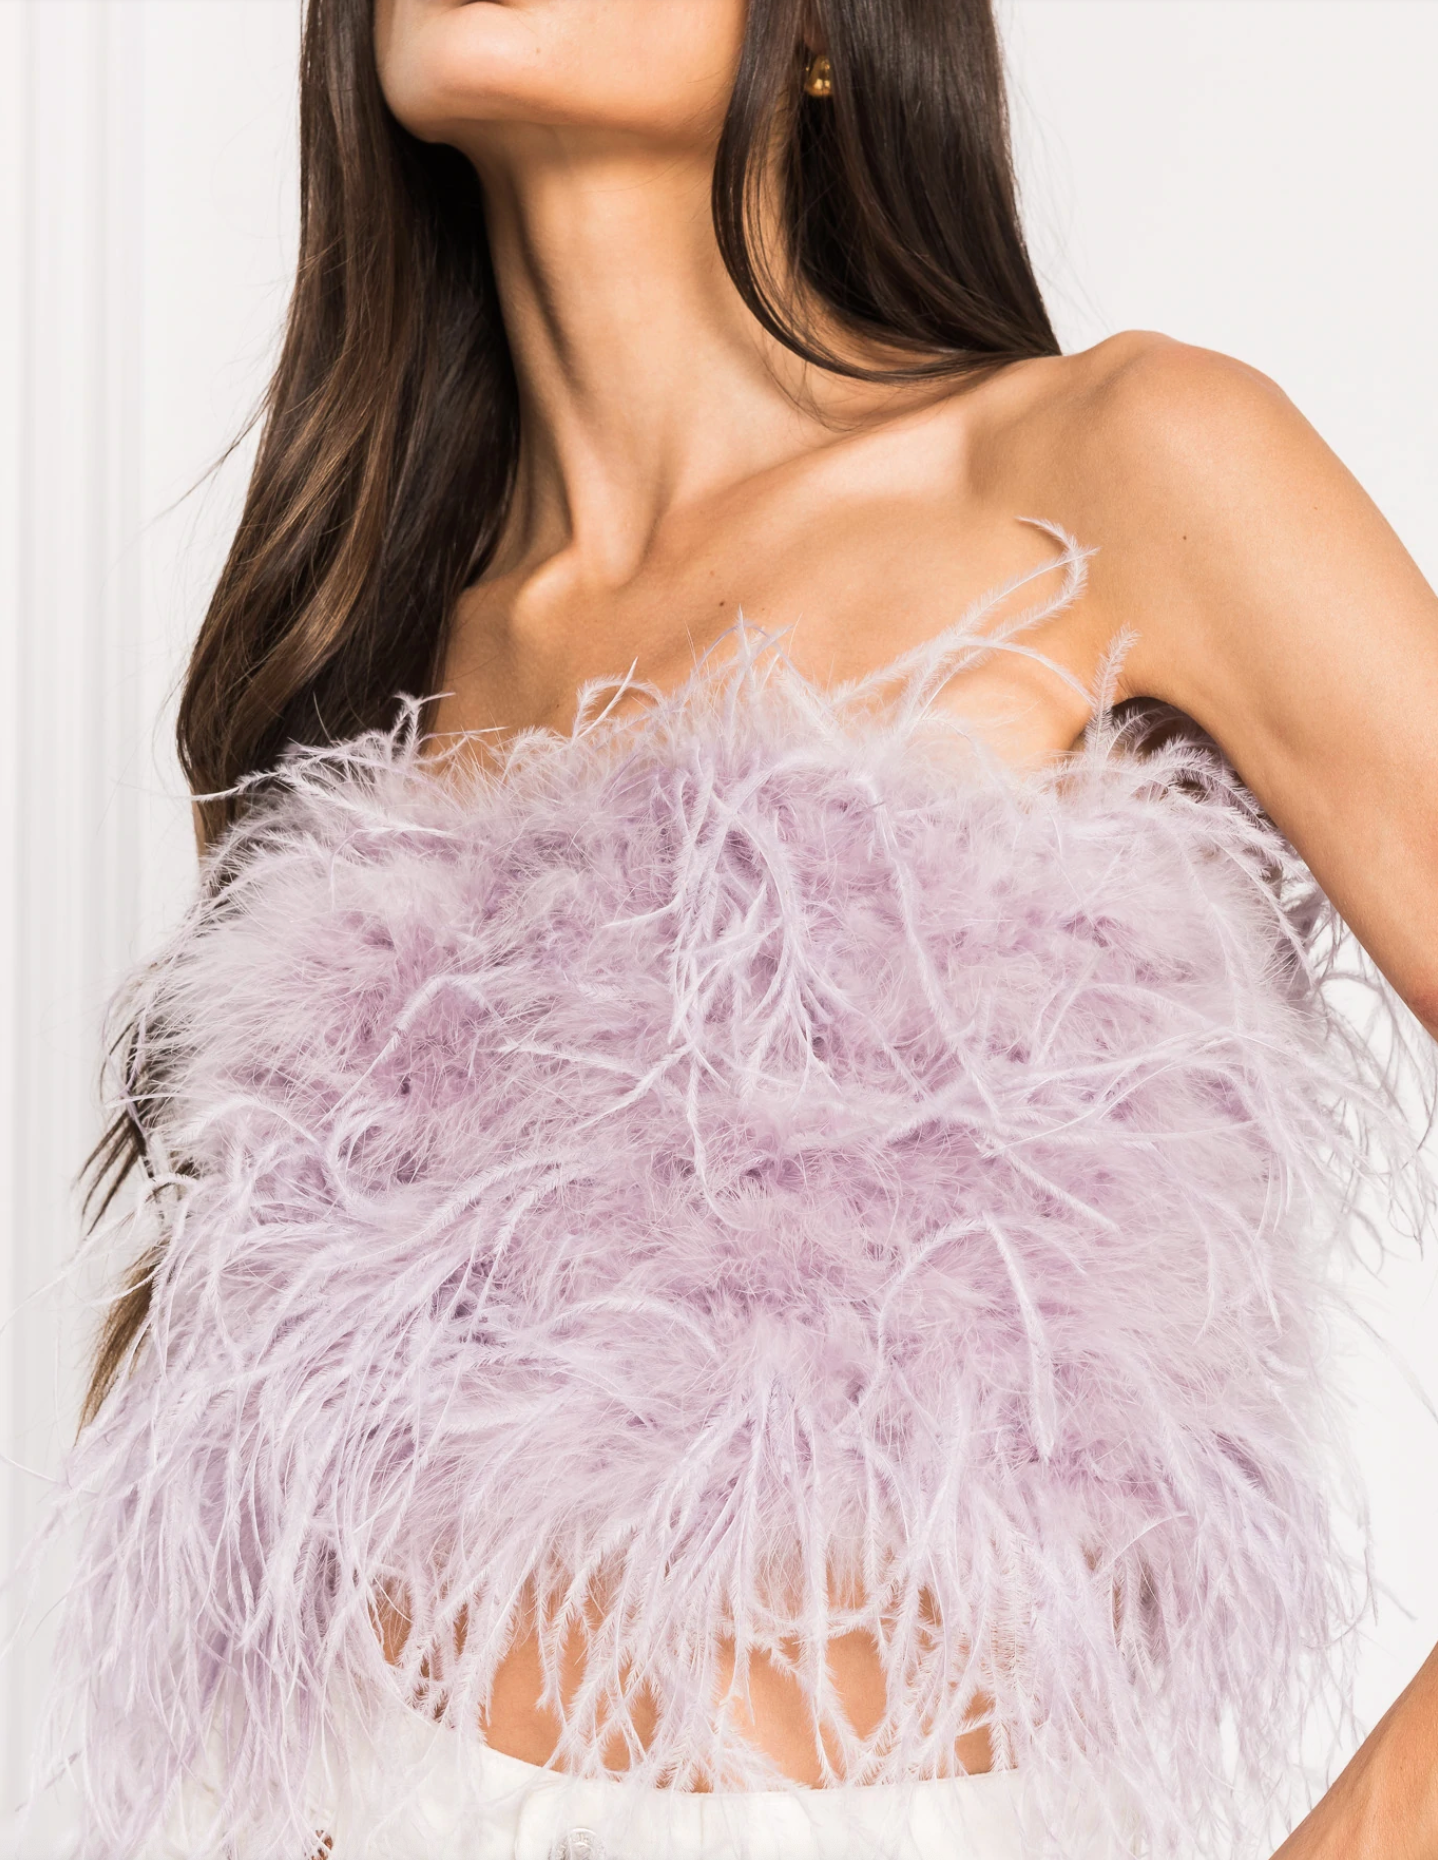 Zania Lavender Feather Bustier